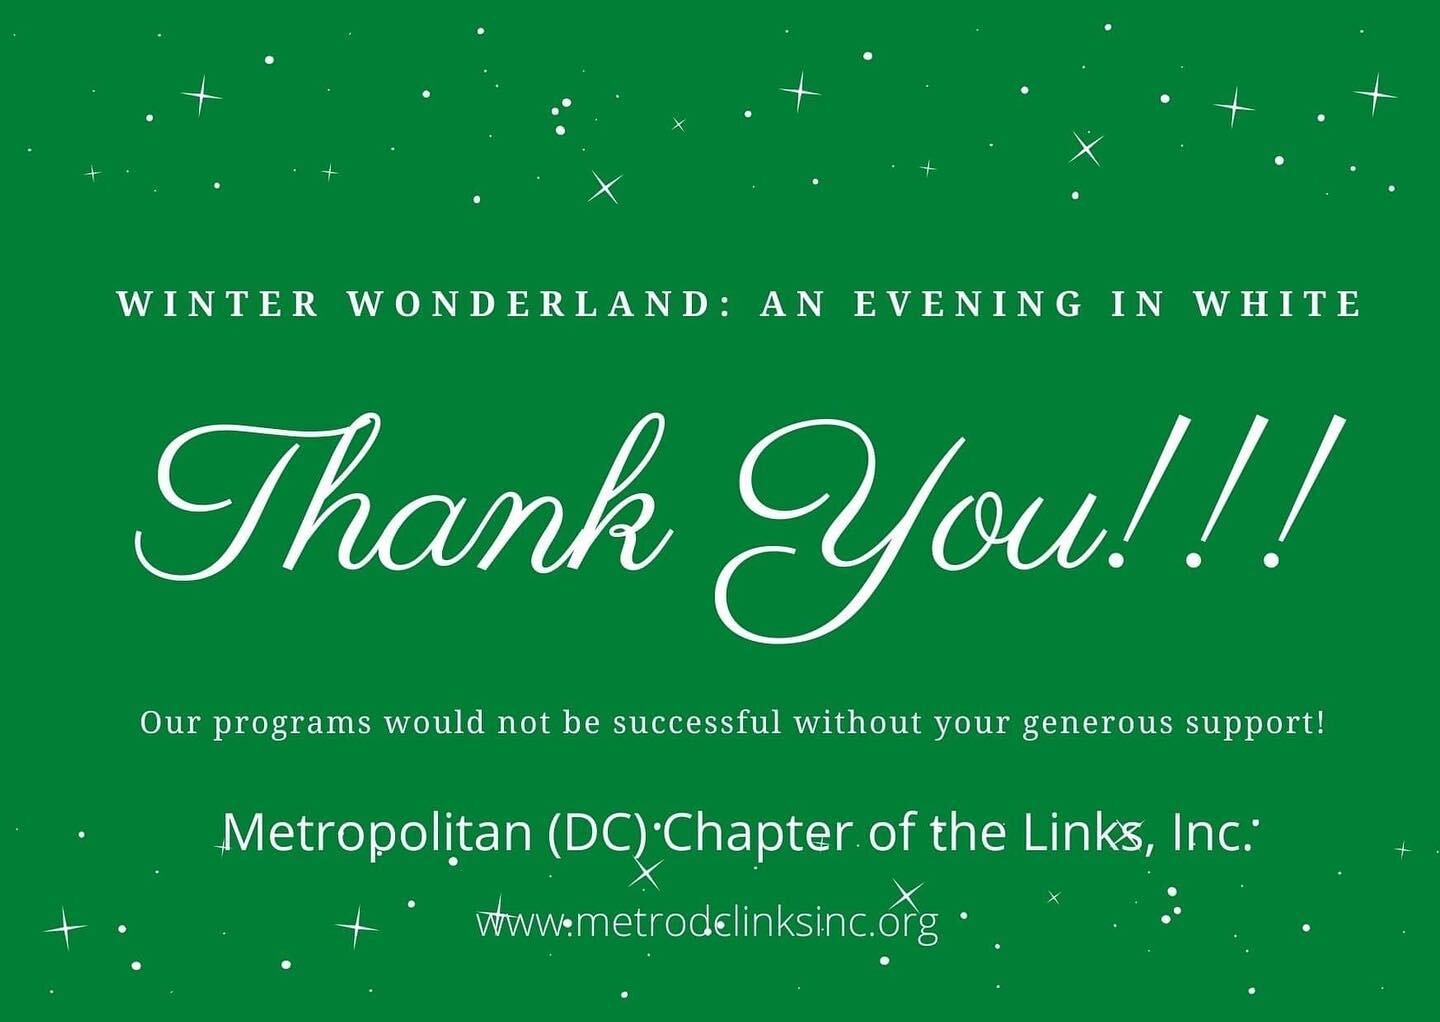 Many thanks to everyone who supported our HBCU scholarship fundraiser!! We came. We saw. We dined. We laughed. And most of all, we made an impact! Give this post a like if you were lucky enough to be there! 💚

#metrodclinksinc #HBCUScholarships #Con